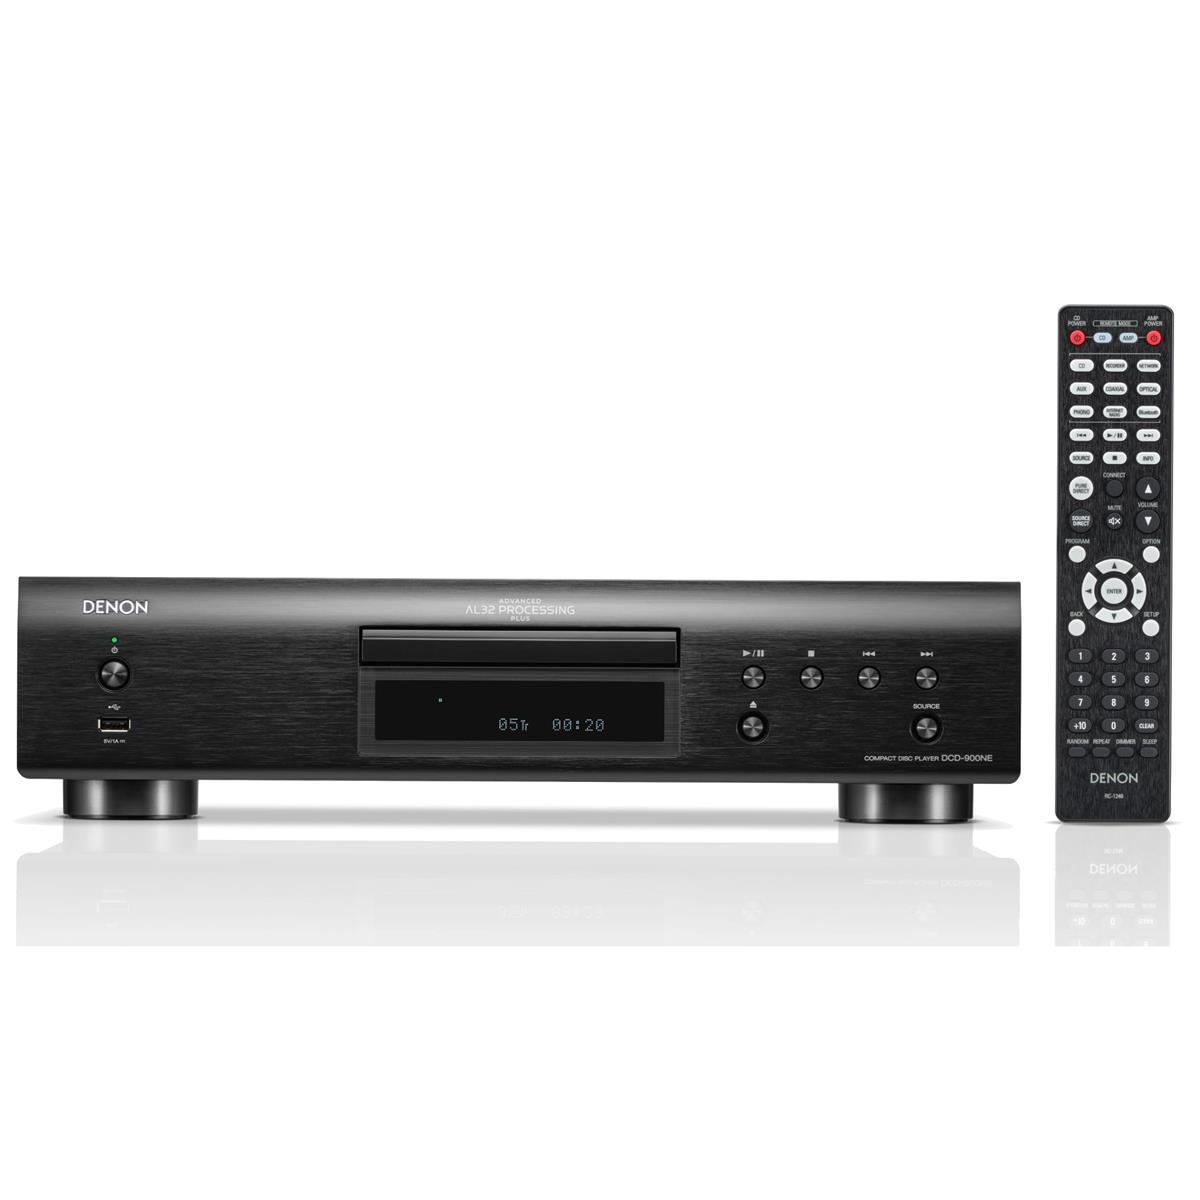 Image of Denon DCD-900NE CD Player with Advanced AL32 Processing Plus and USB